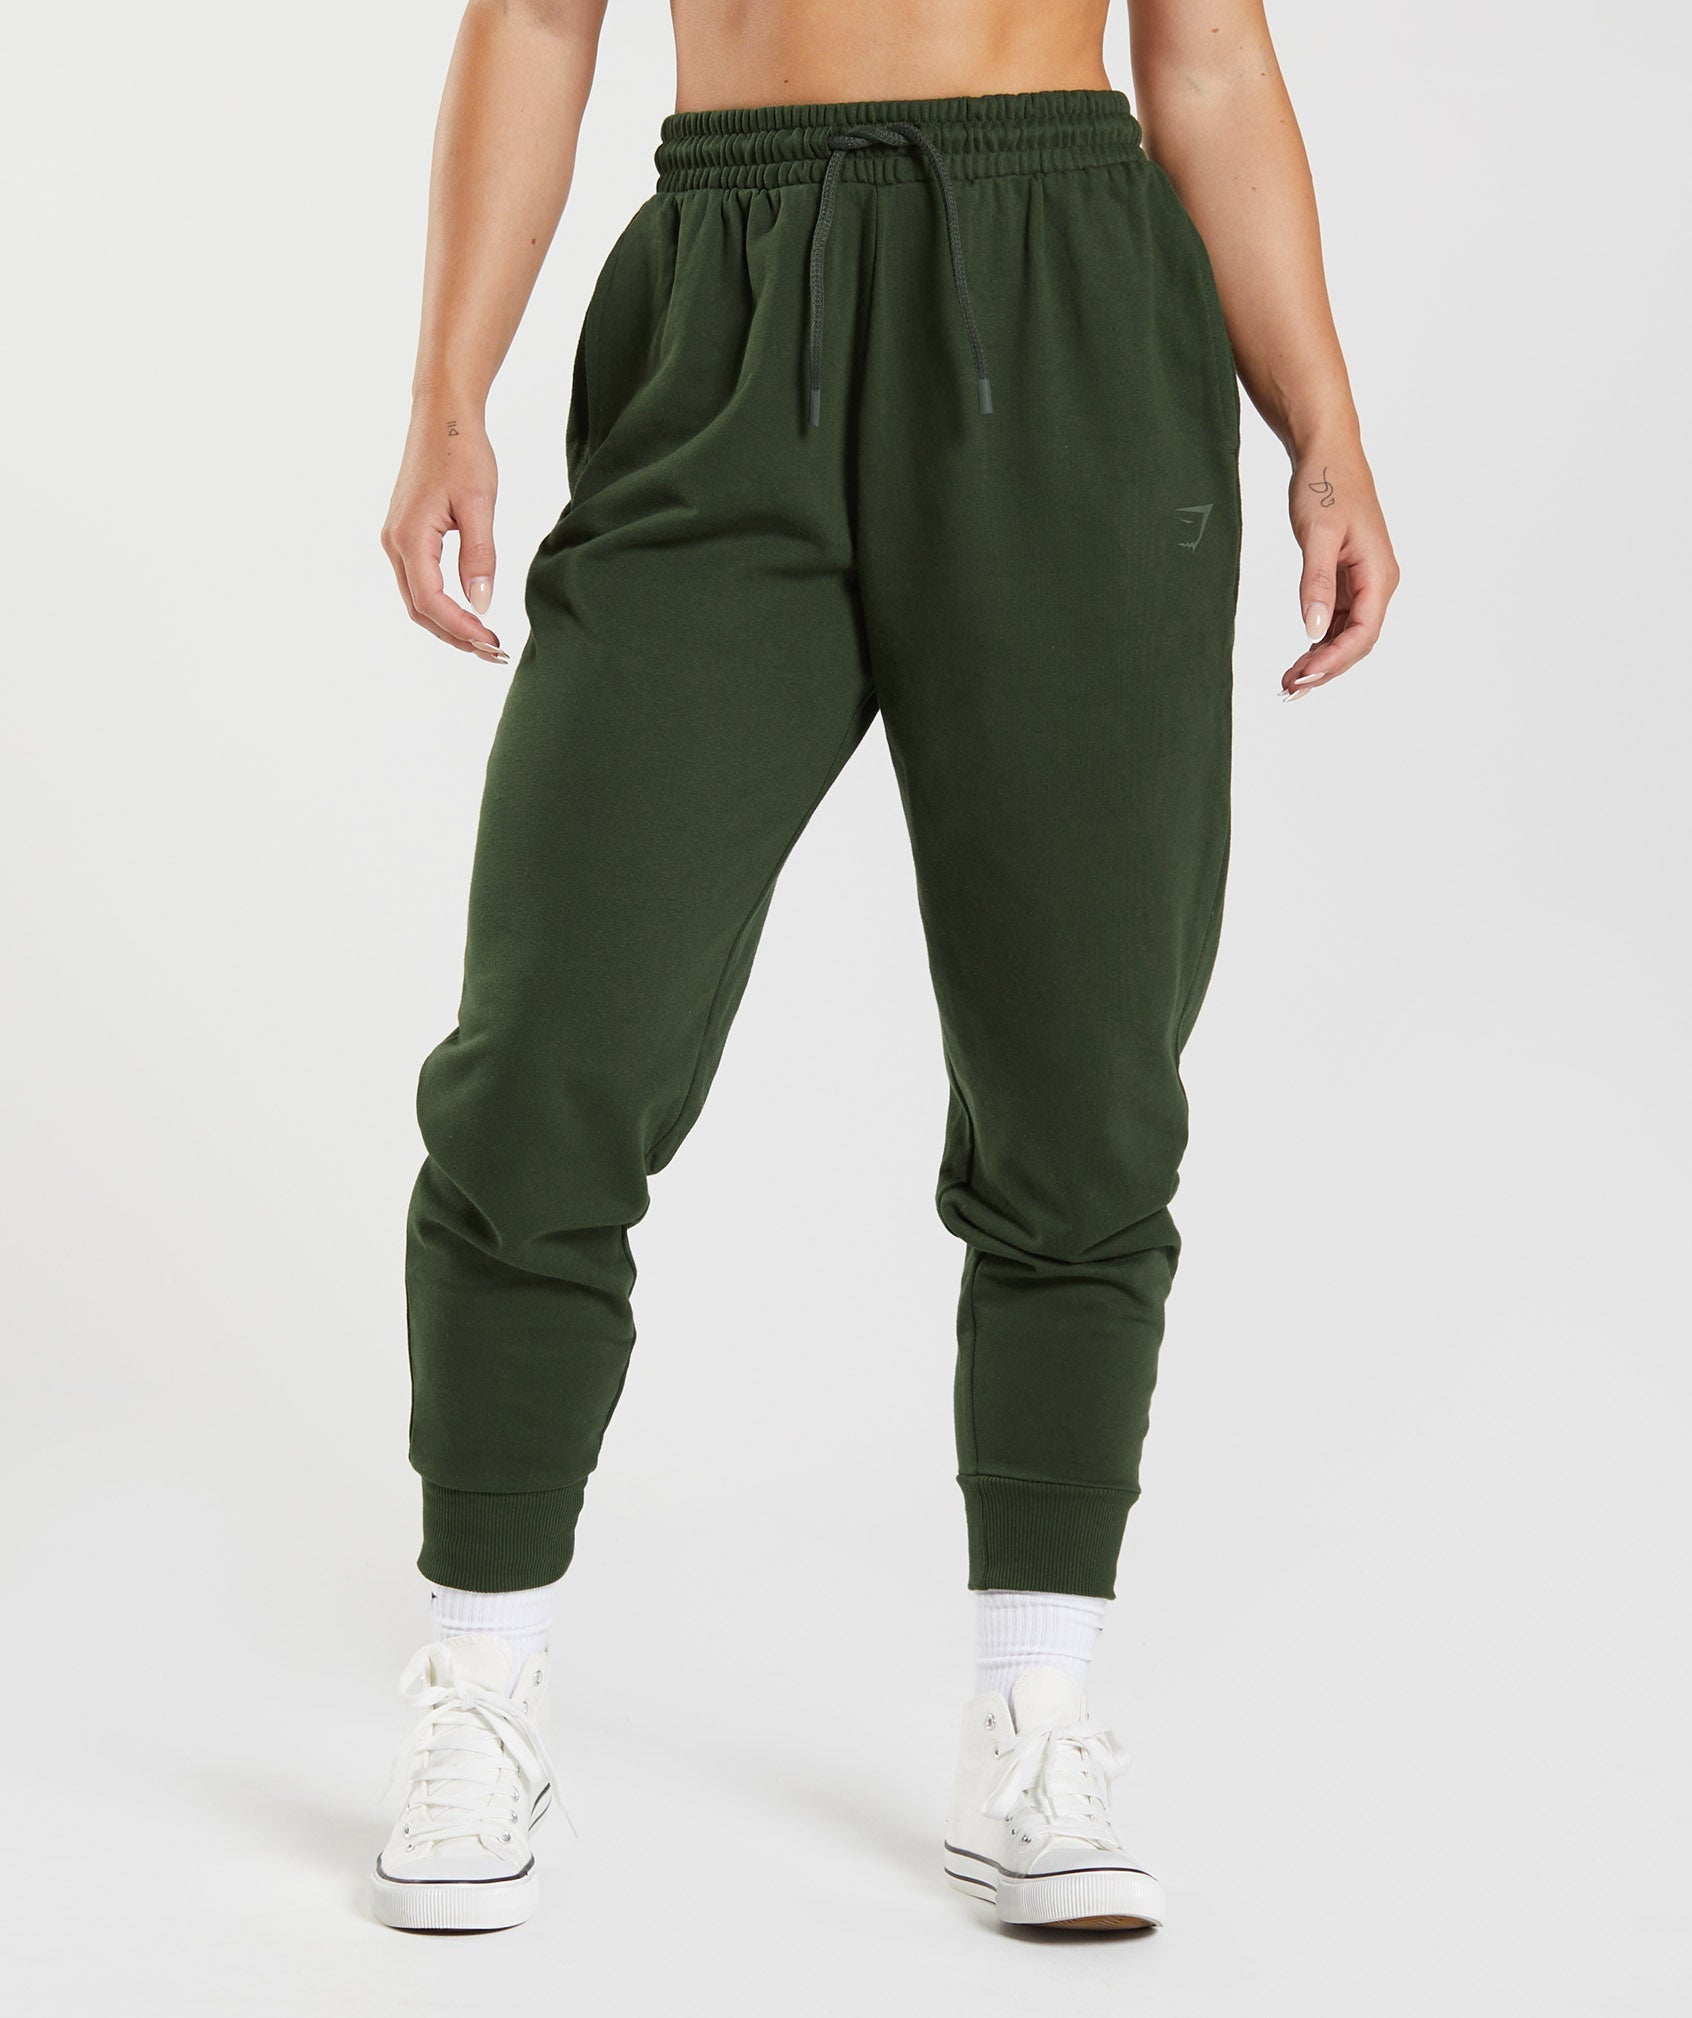 Gymshark GS Power Joggers - Moss Olive